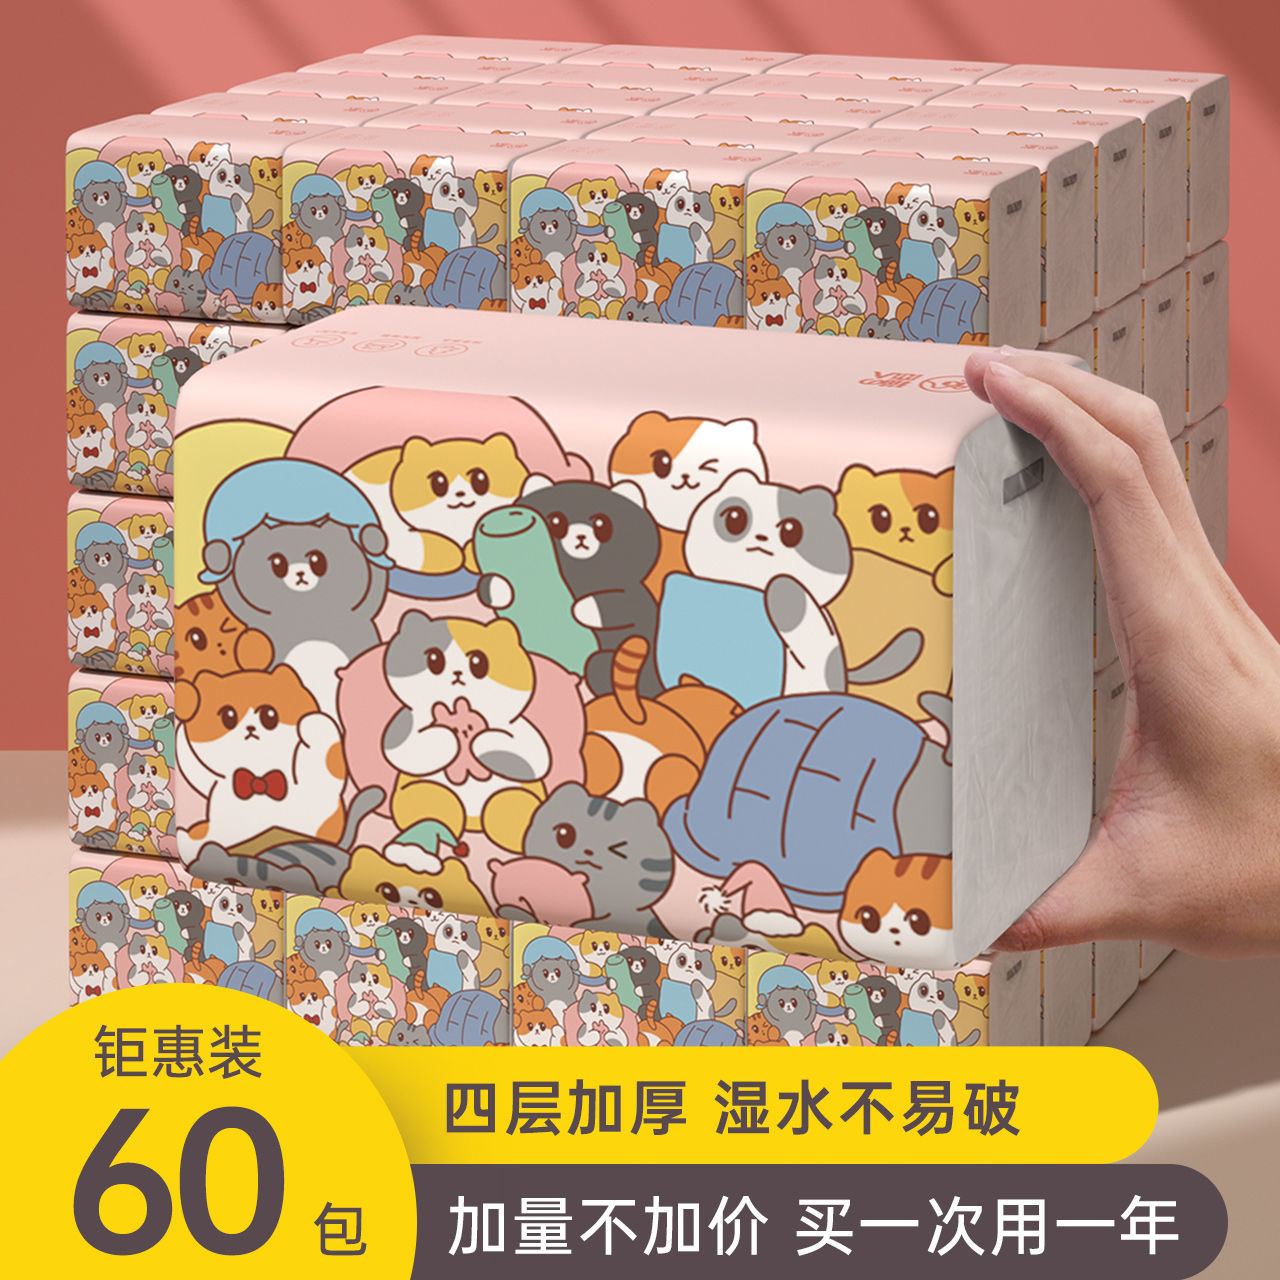 [60 Packs for Stocking up for One Year] Log Tissue Whole Box Wholesale Toilet Paper Napkin Household Face Towel 1 Pack